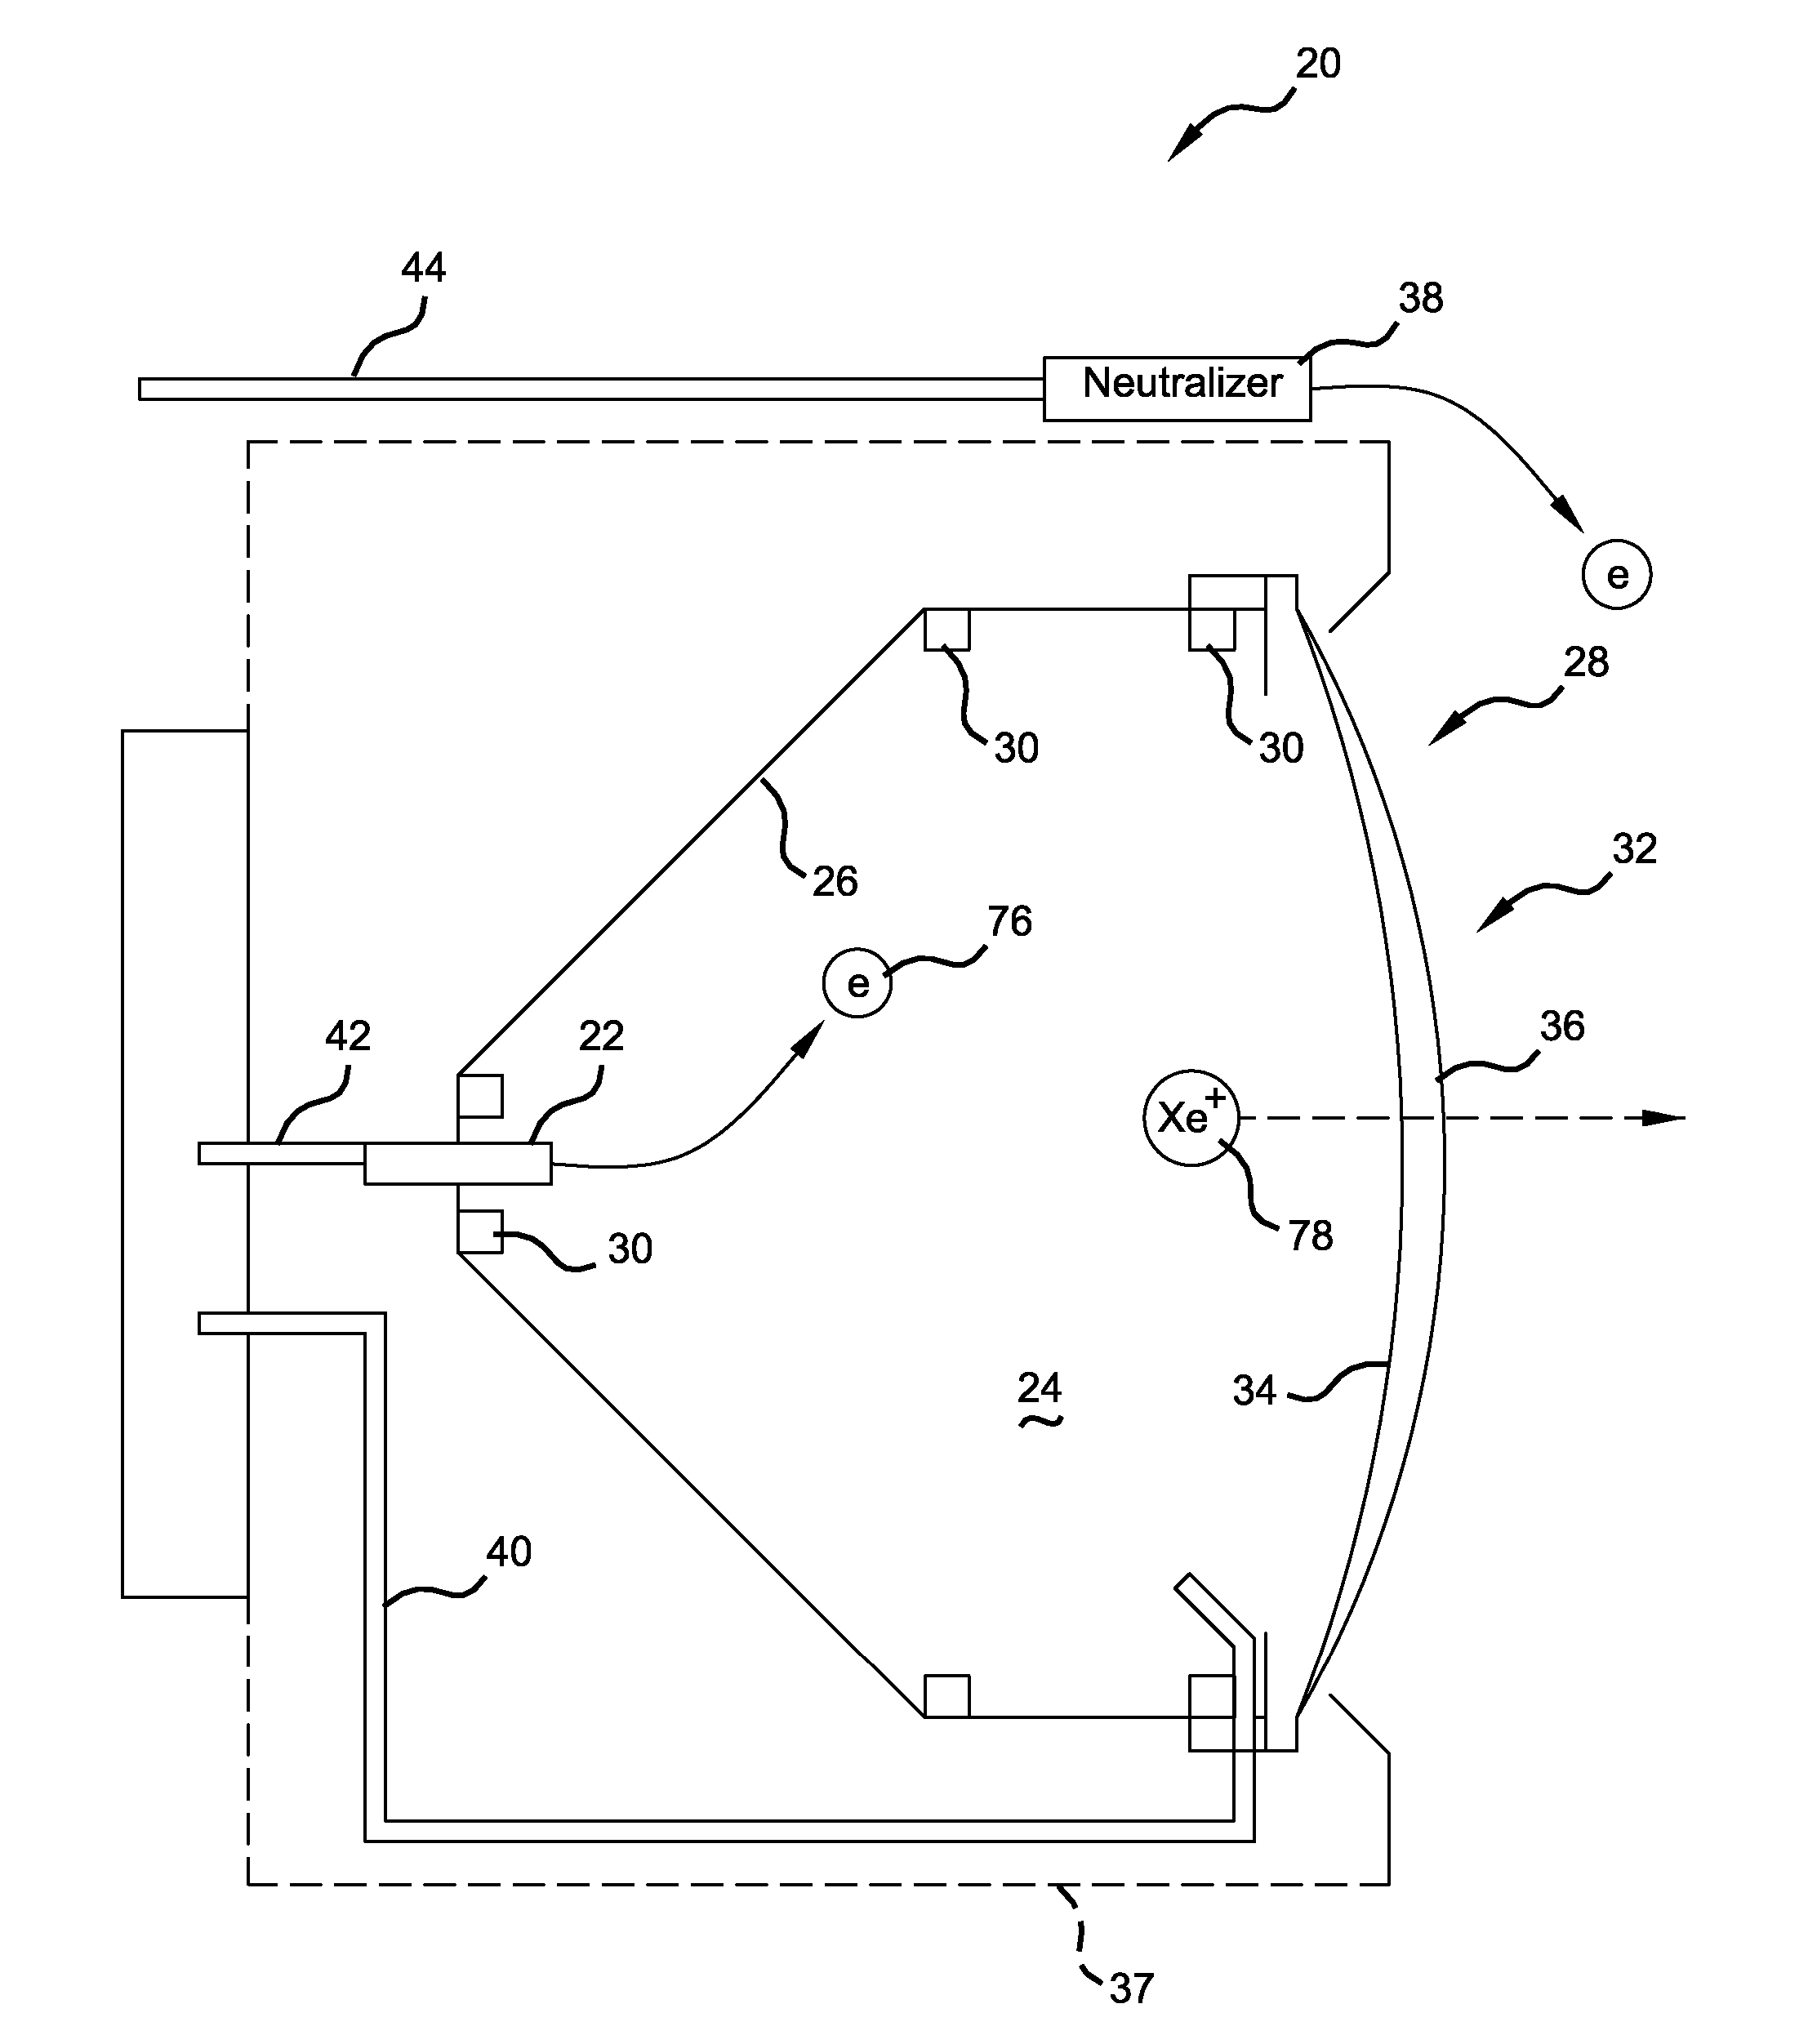 Gas-fed hollow cathode keeper and method of operating same